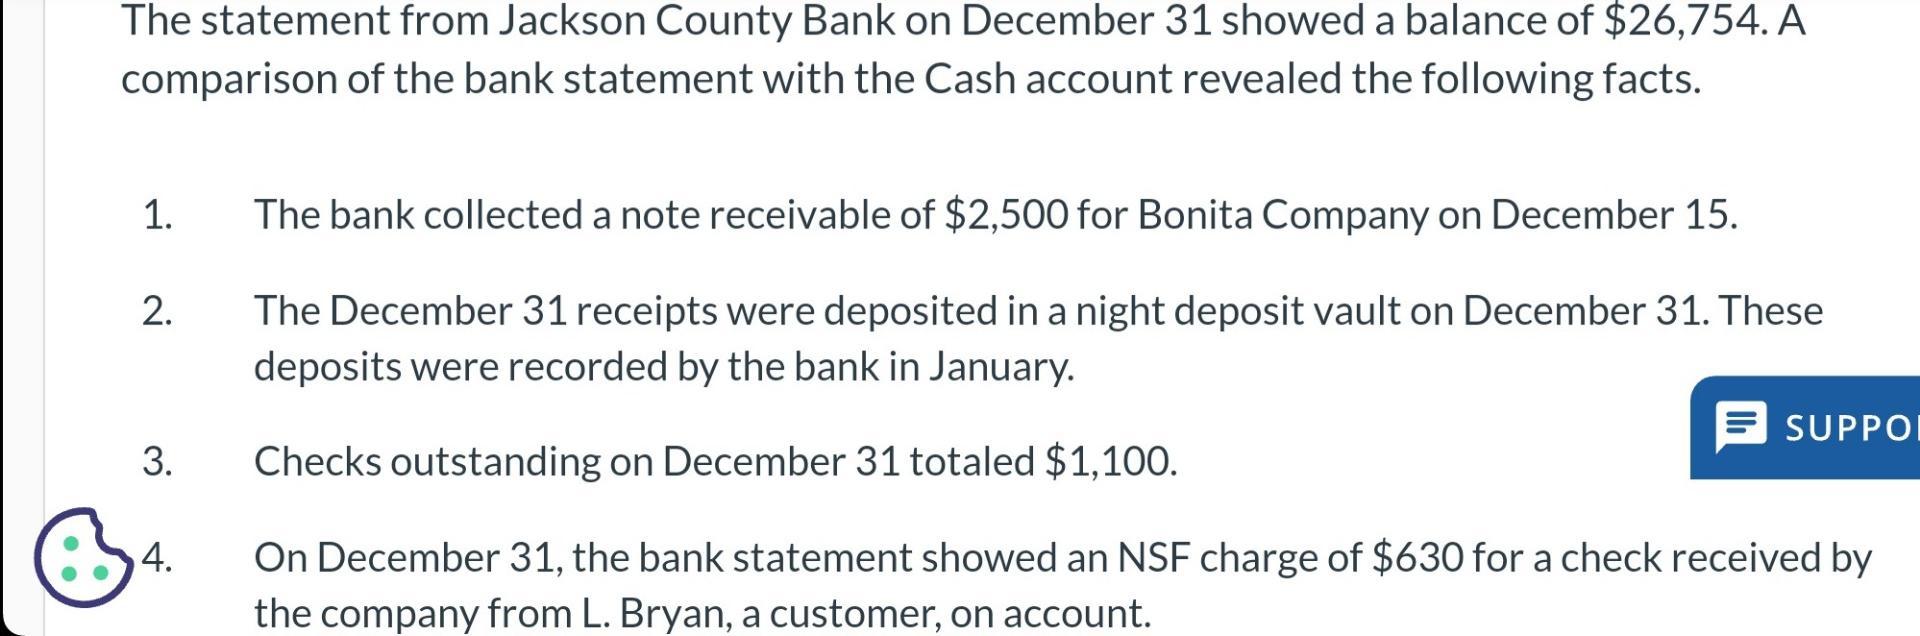 The statement from Jackson County Bank on December 31 showed a balance of $26,754. A comparison of the bank